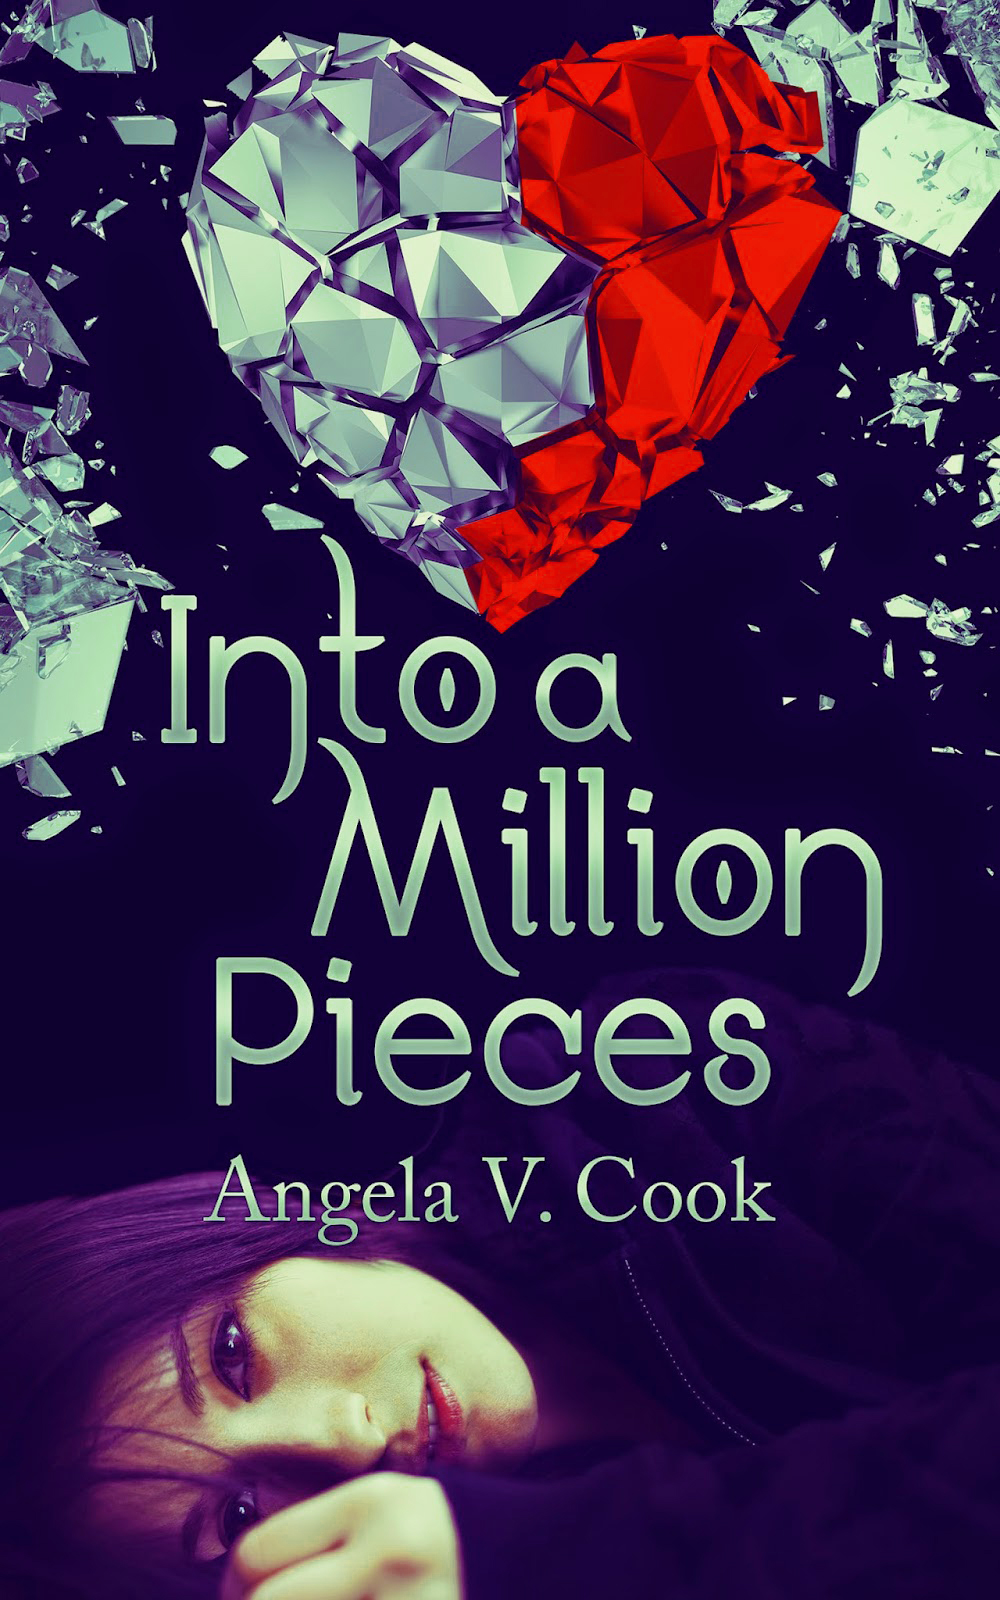 Into a Million Pieces by Angela V. Cook